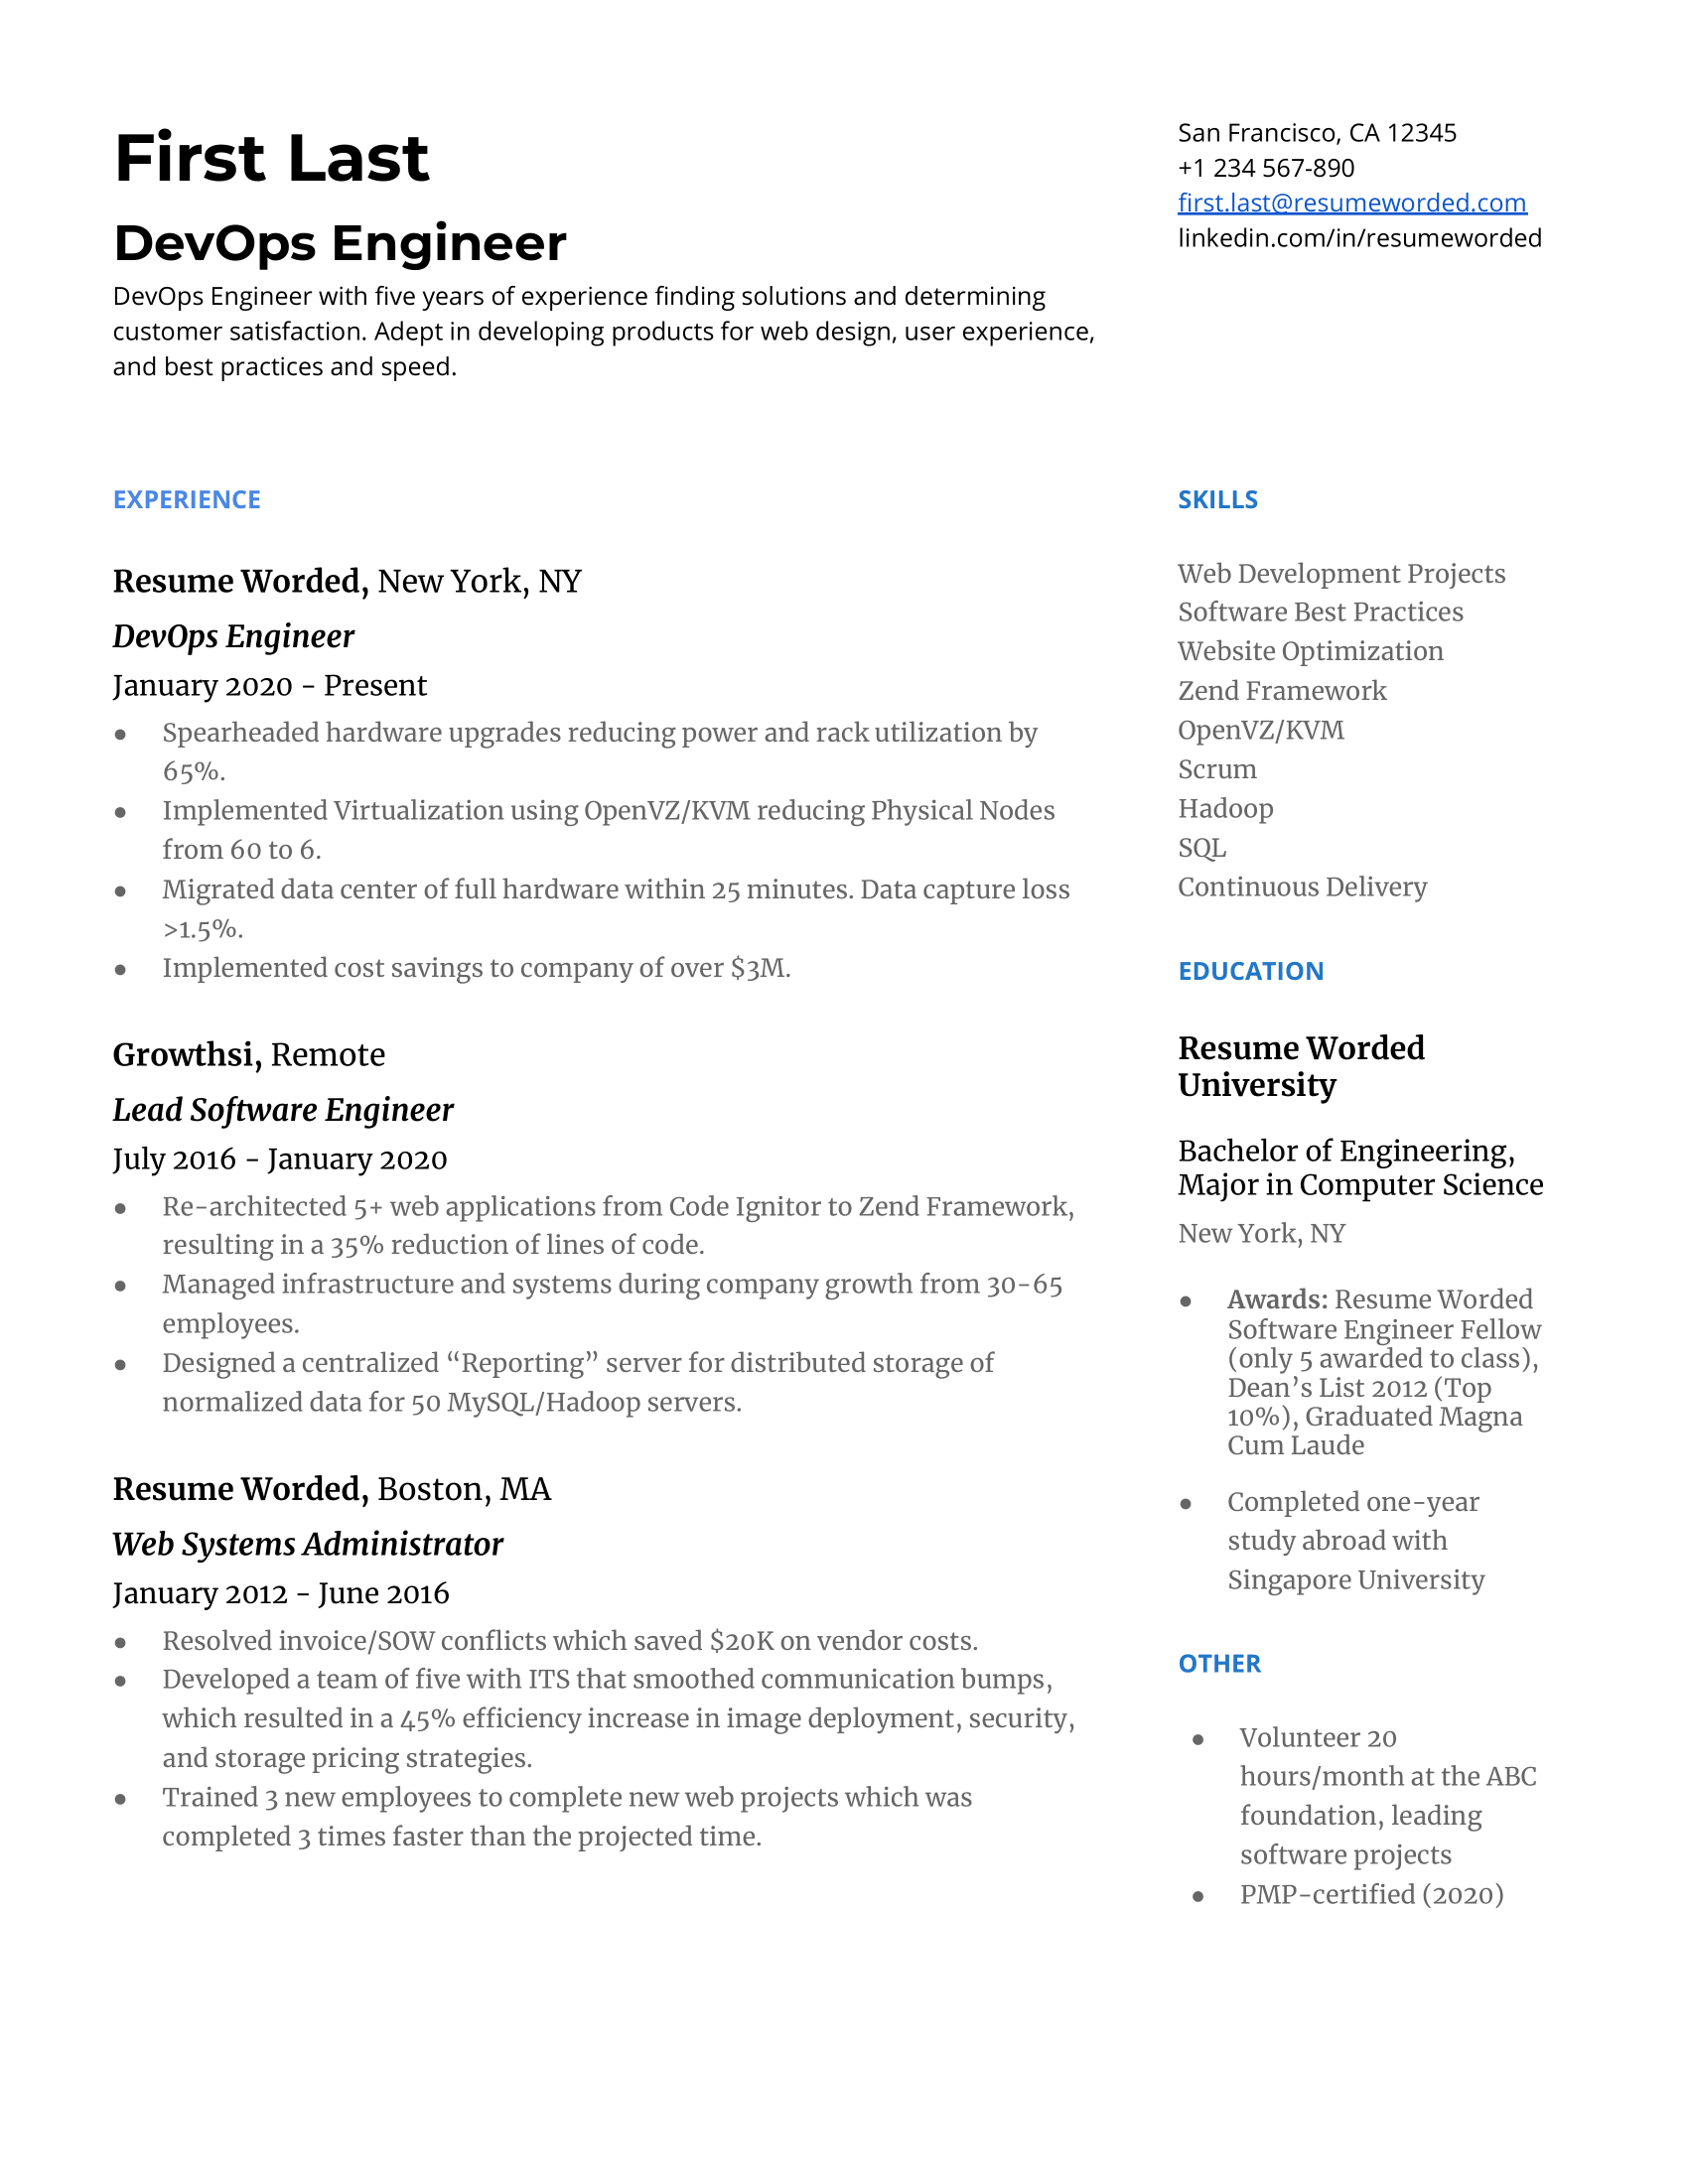 A DevOps engineer resume template prioritizing techniques and hard skills.